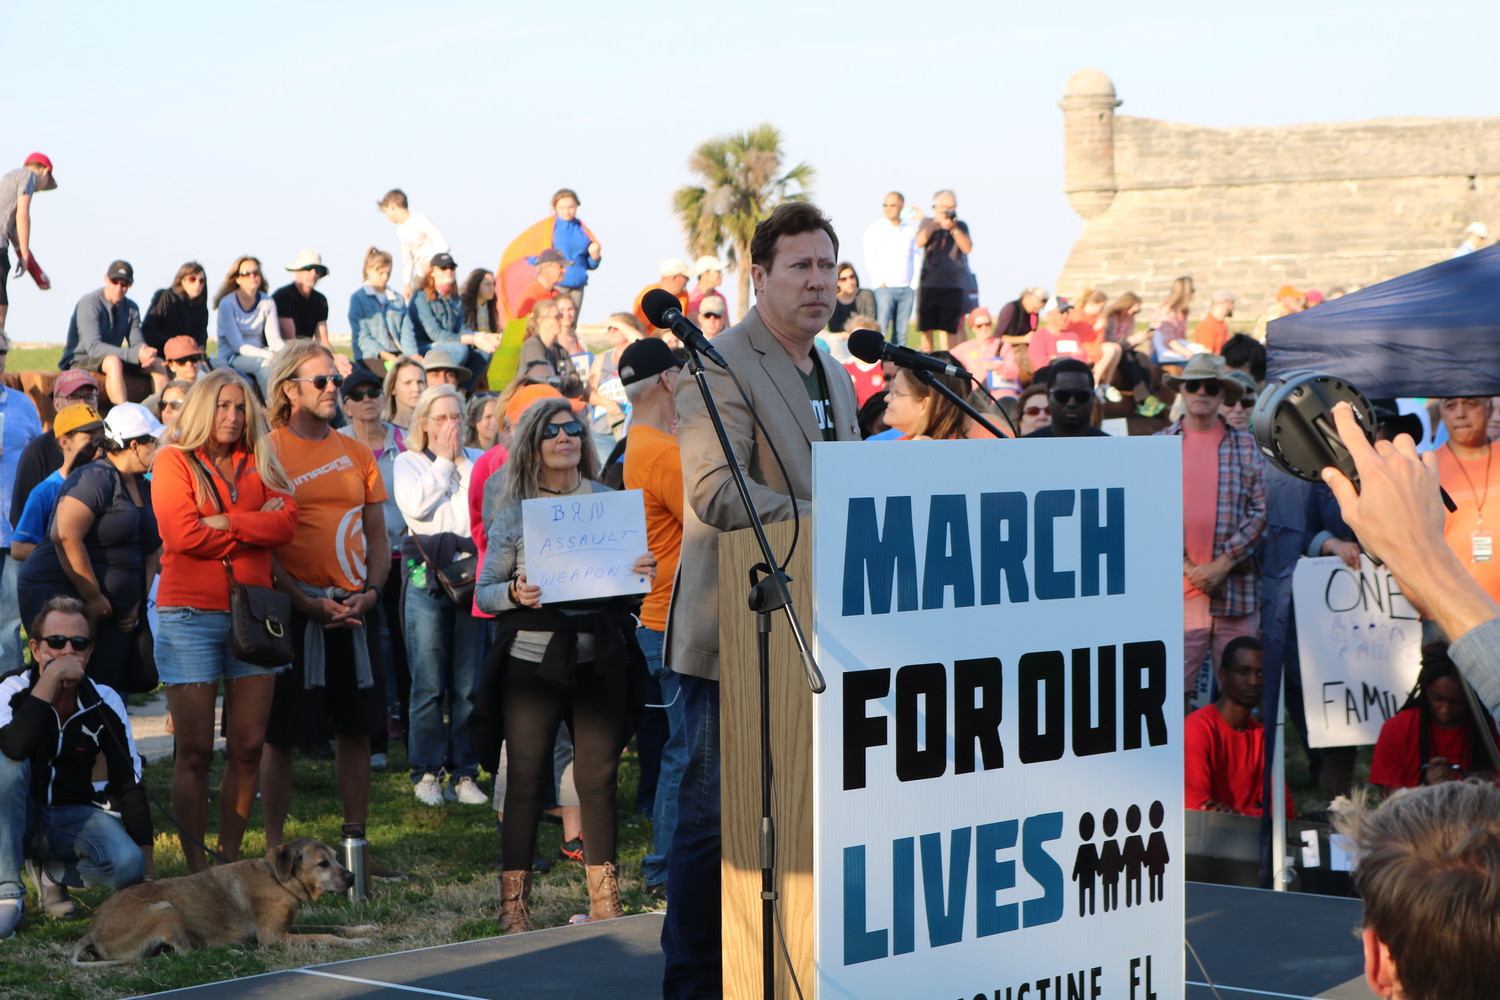 Ges Selmont, candidate for U.S. Congress 4th District, addresses the rally at the March for Our Lives event in St. Augustine on March 24.